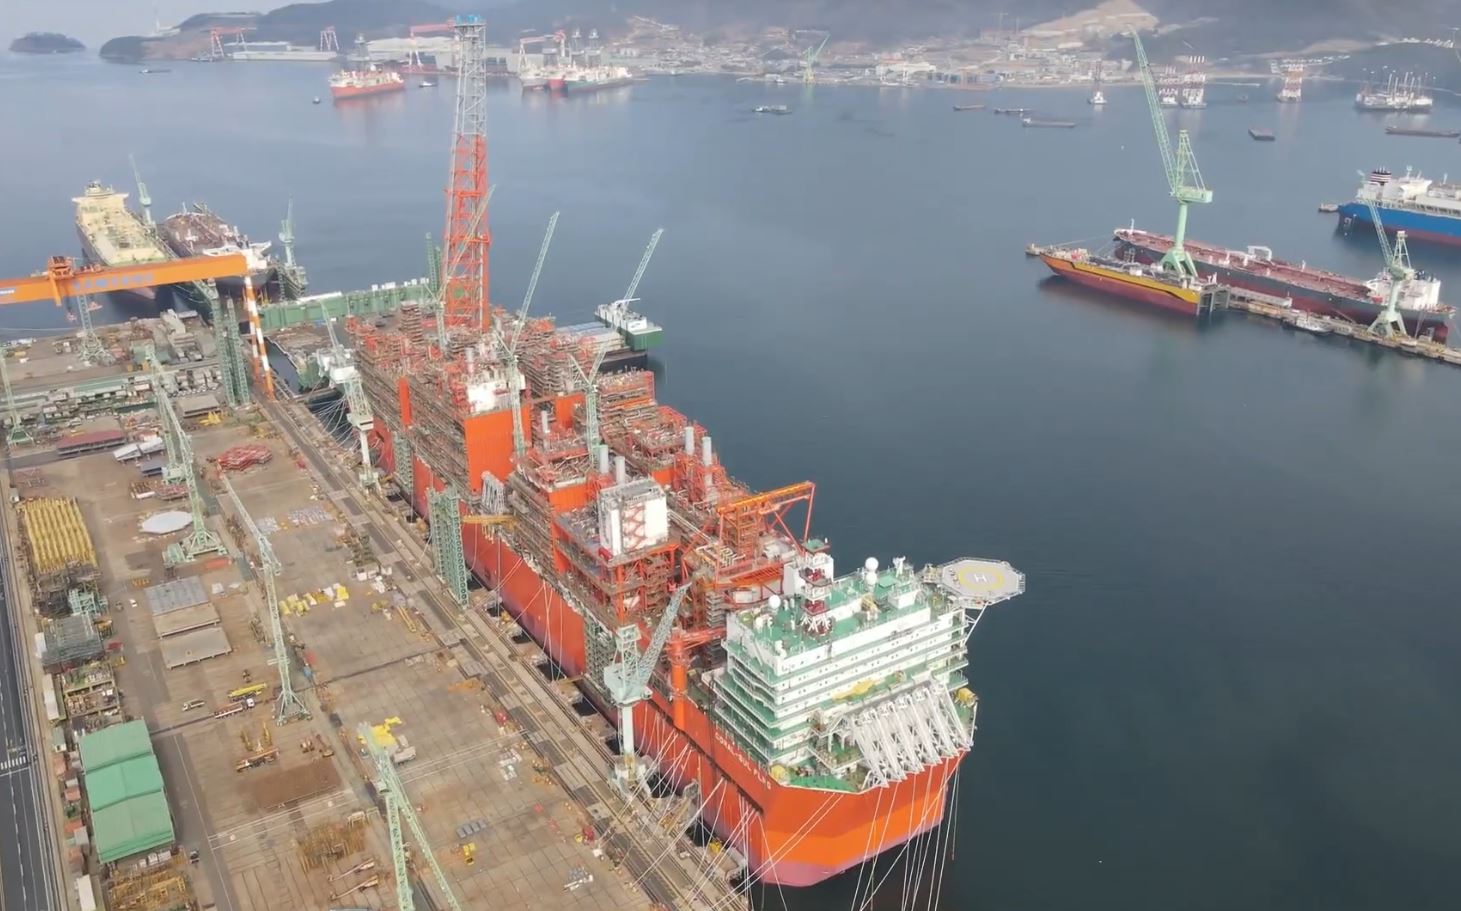 Video turret mooring system installed on Eni's Coral FLNG